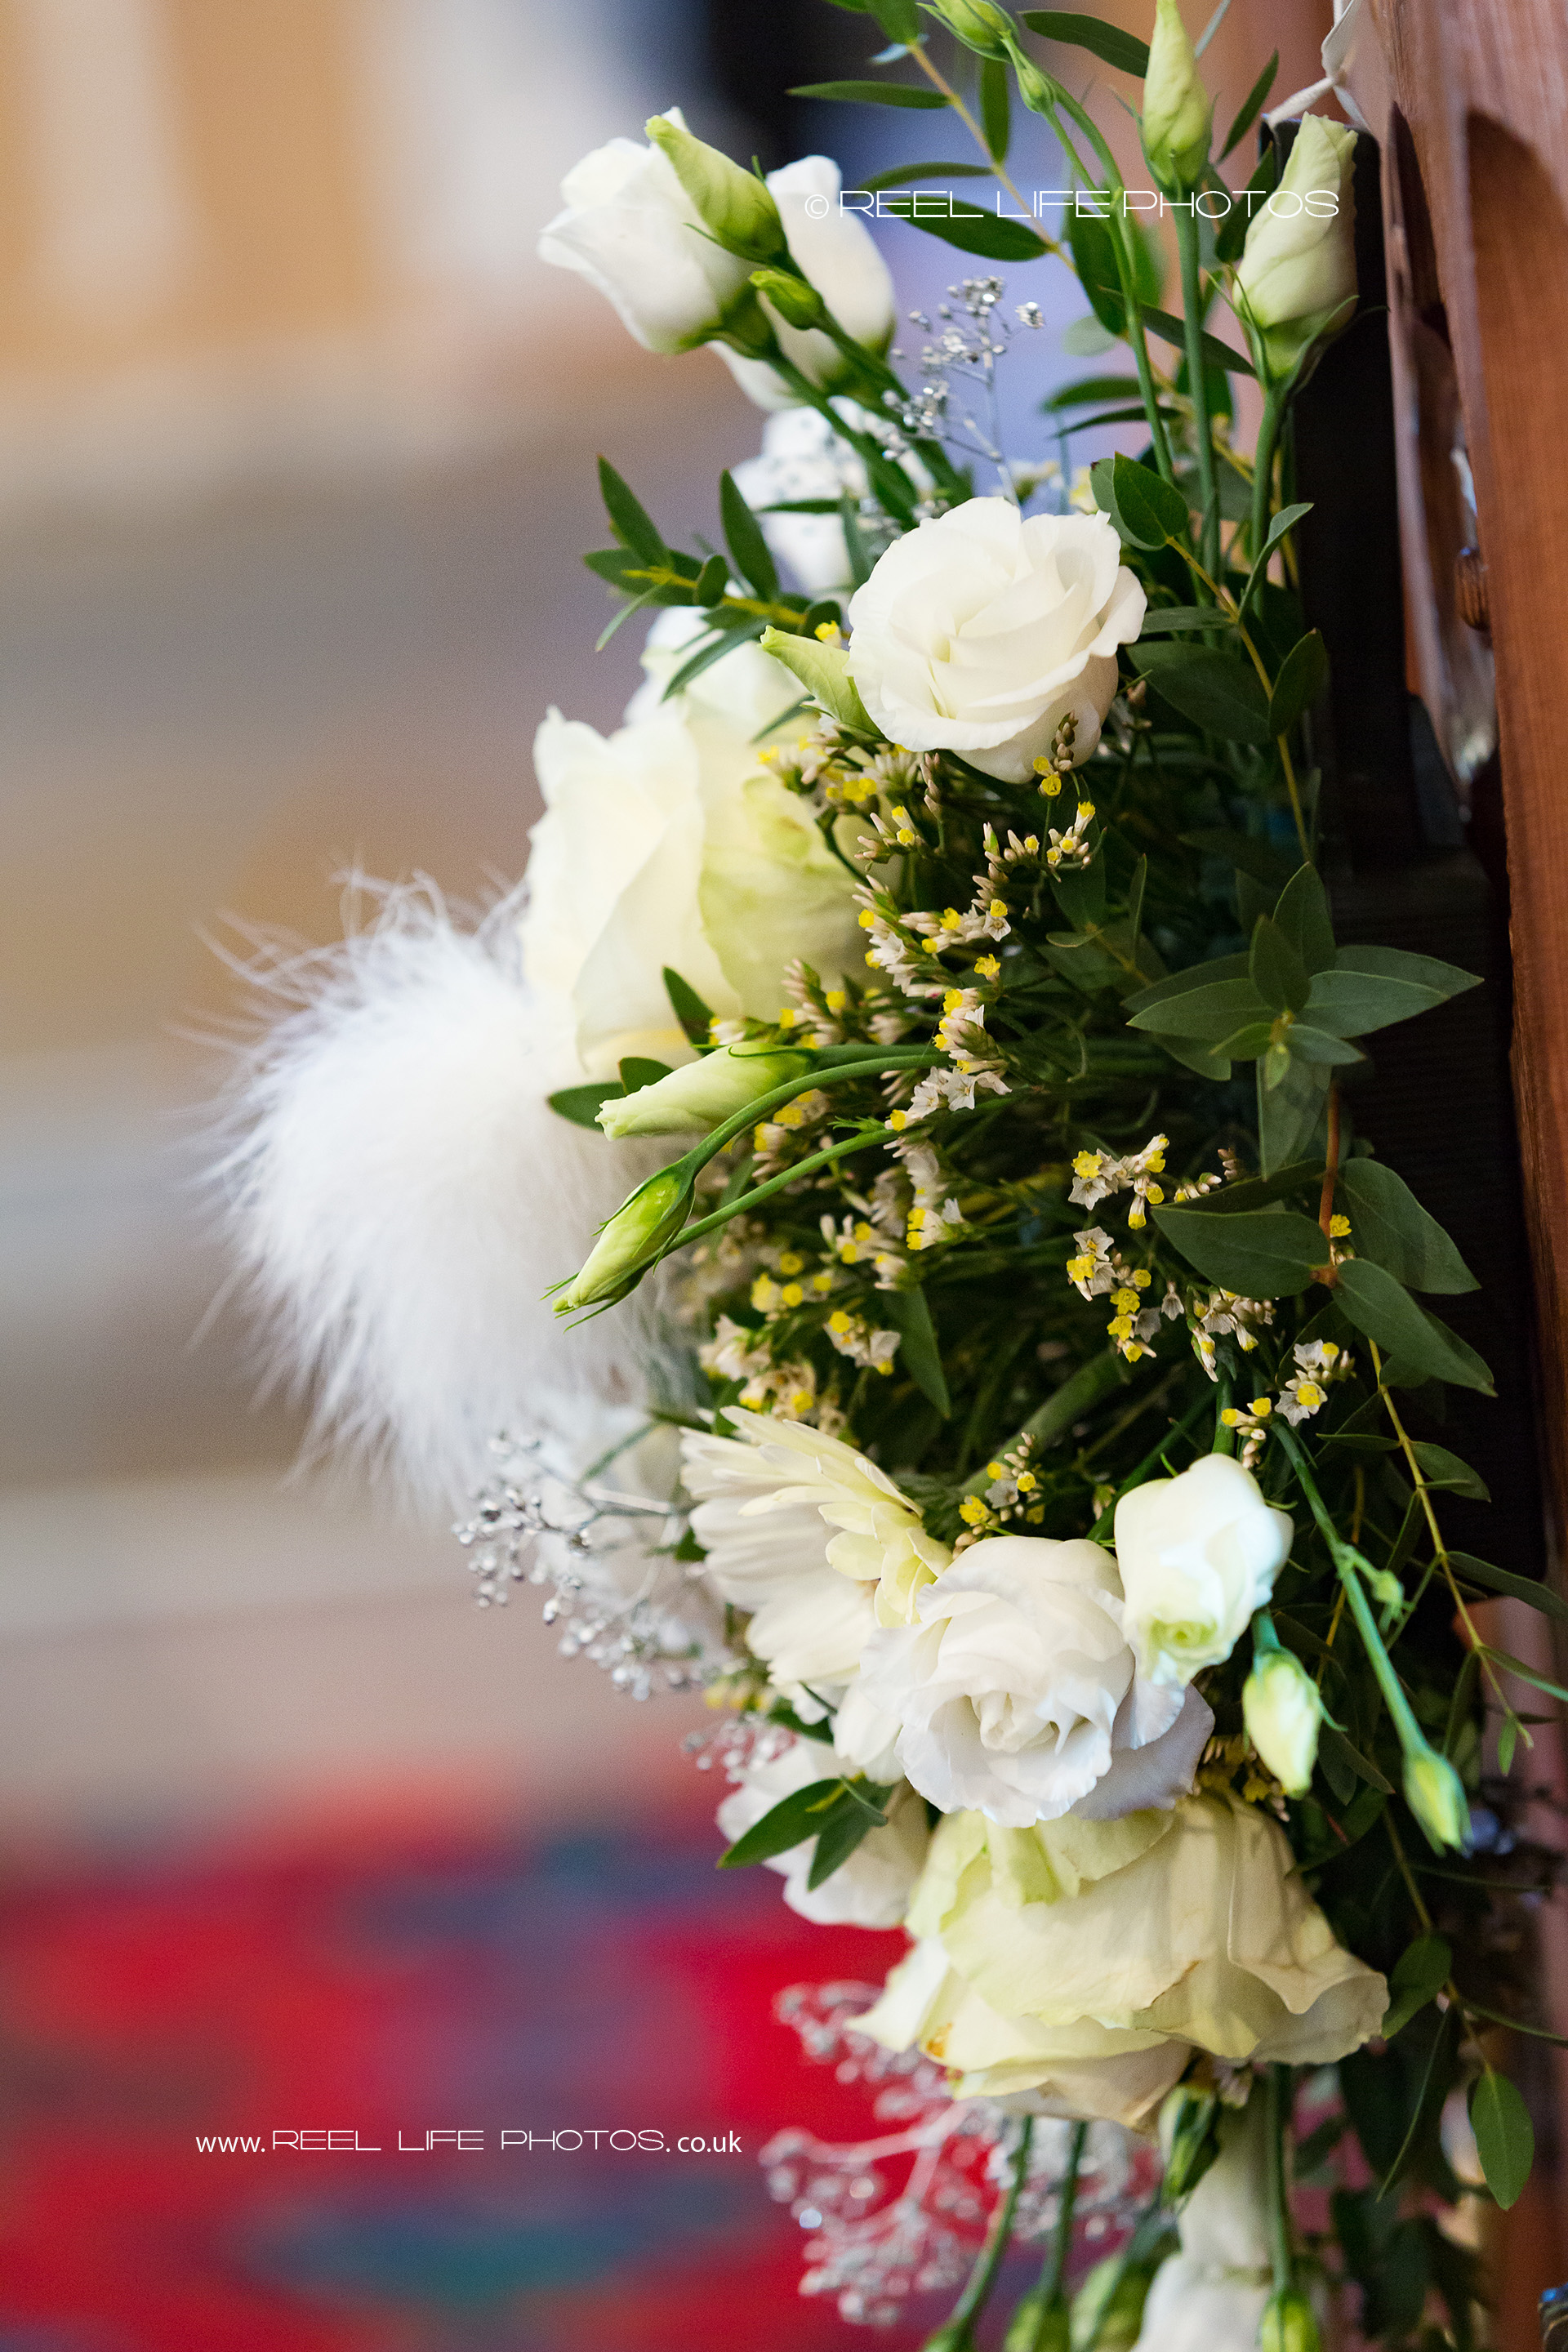 Beautiful floral arrangements decorate the sides of the church pews